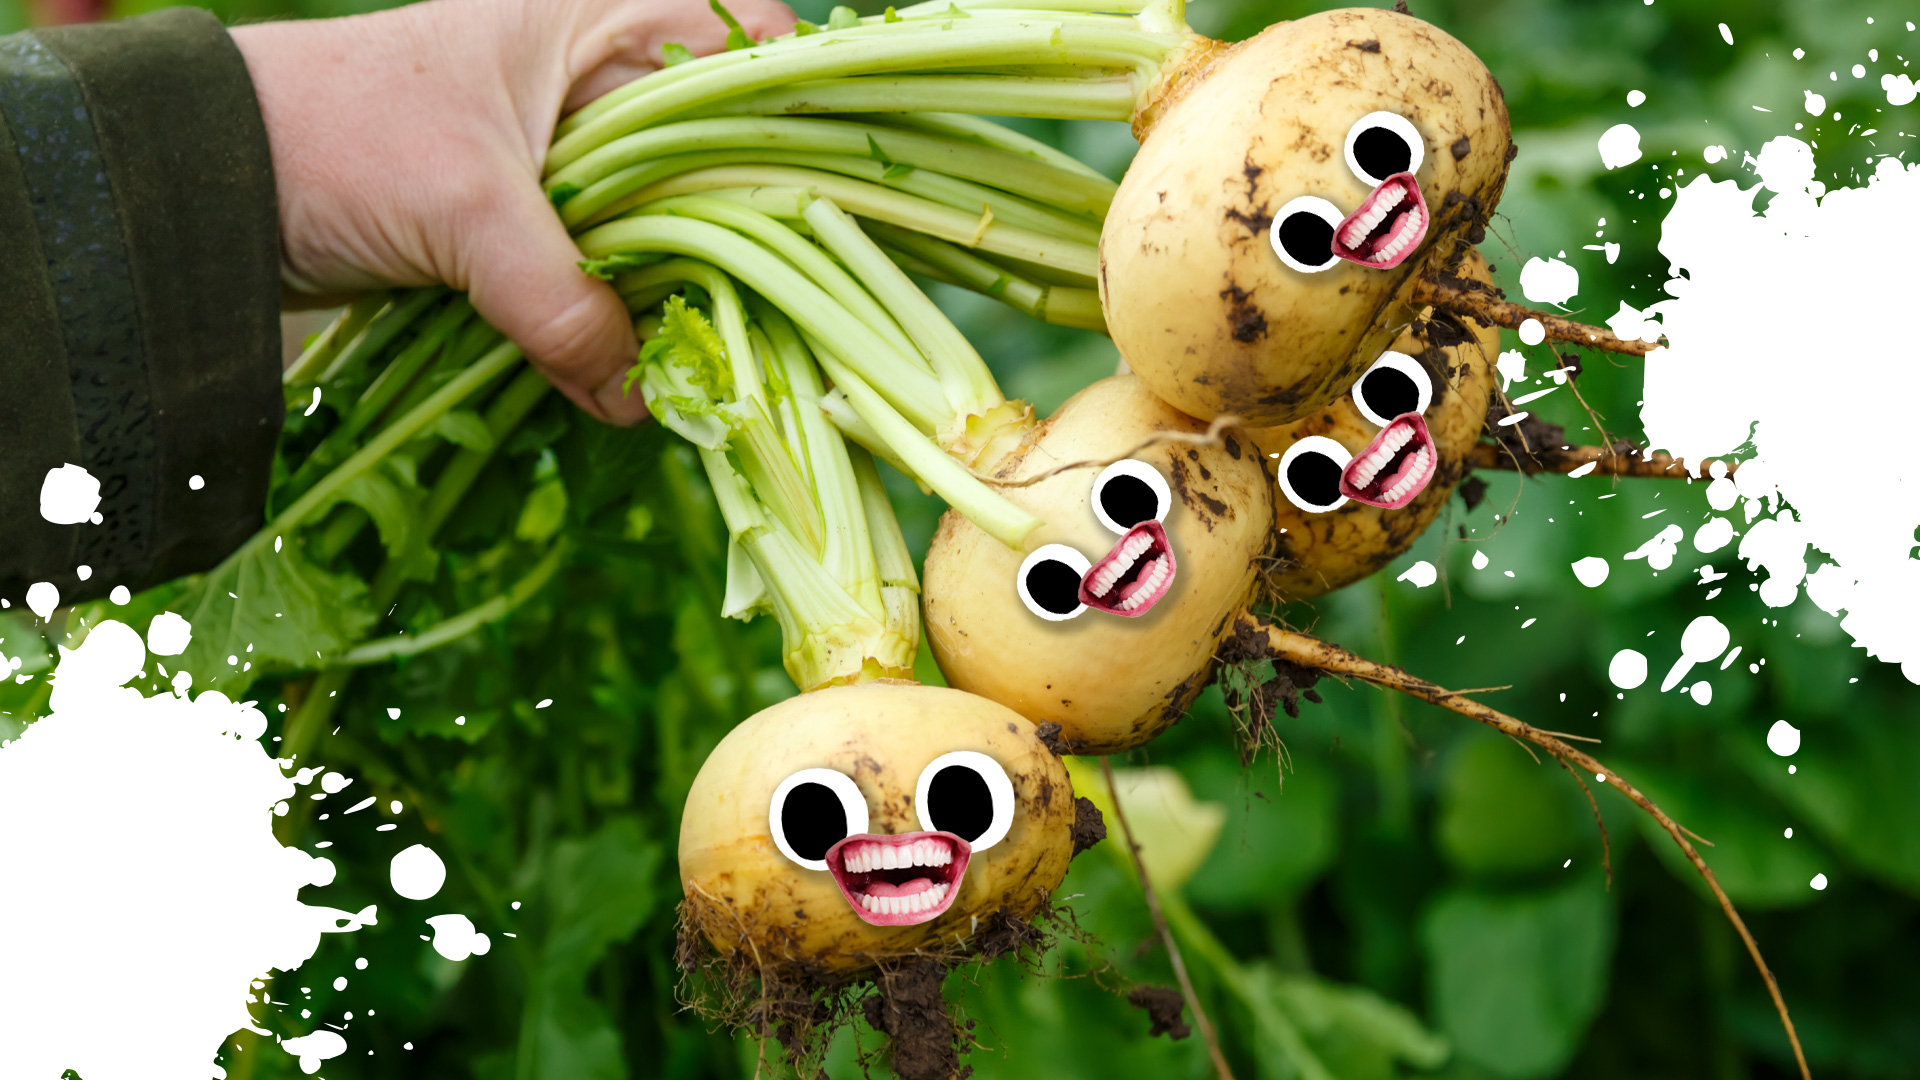 A bunch of turnips